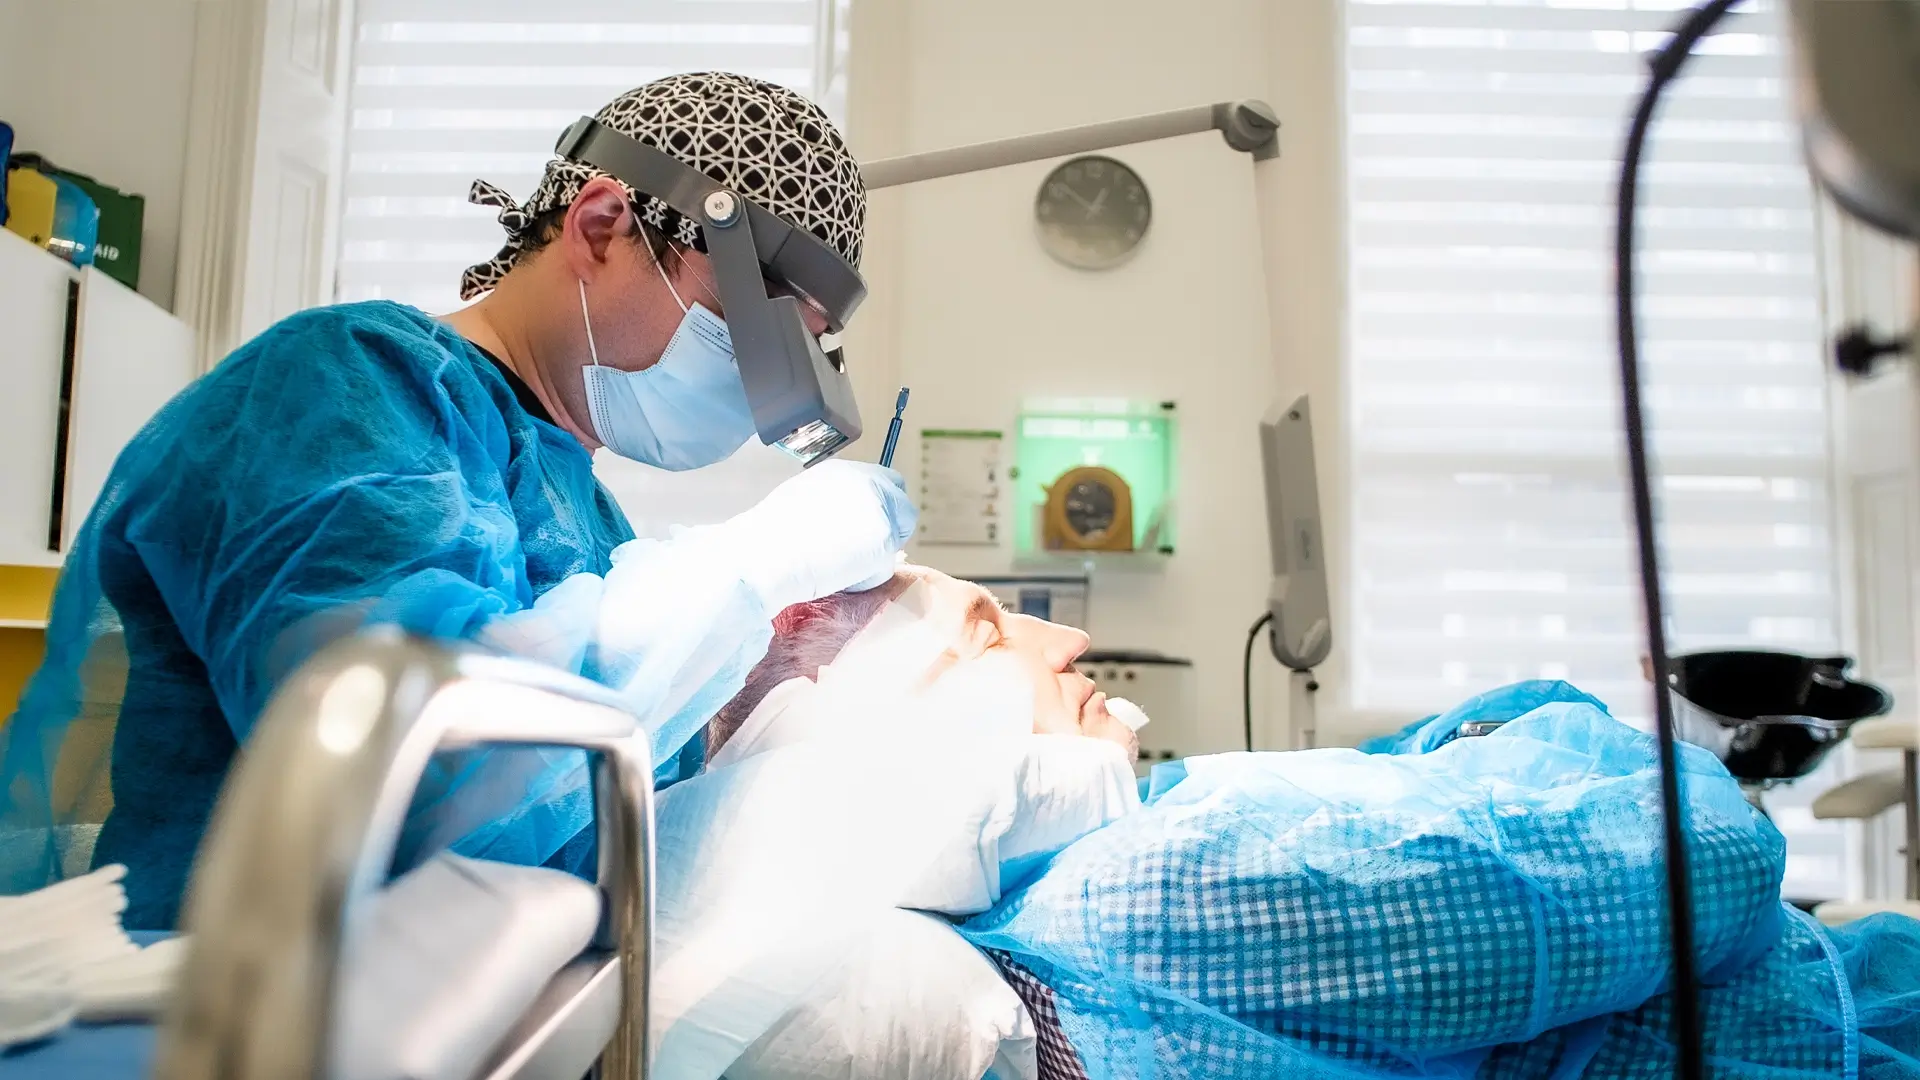 A dentist in blue scrubs and protective gear is examining a patient's teeth in a well-equipped dental office. The patient, dealing with female hair loss, is lying back in a dental chair, covered